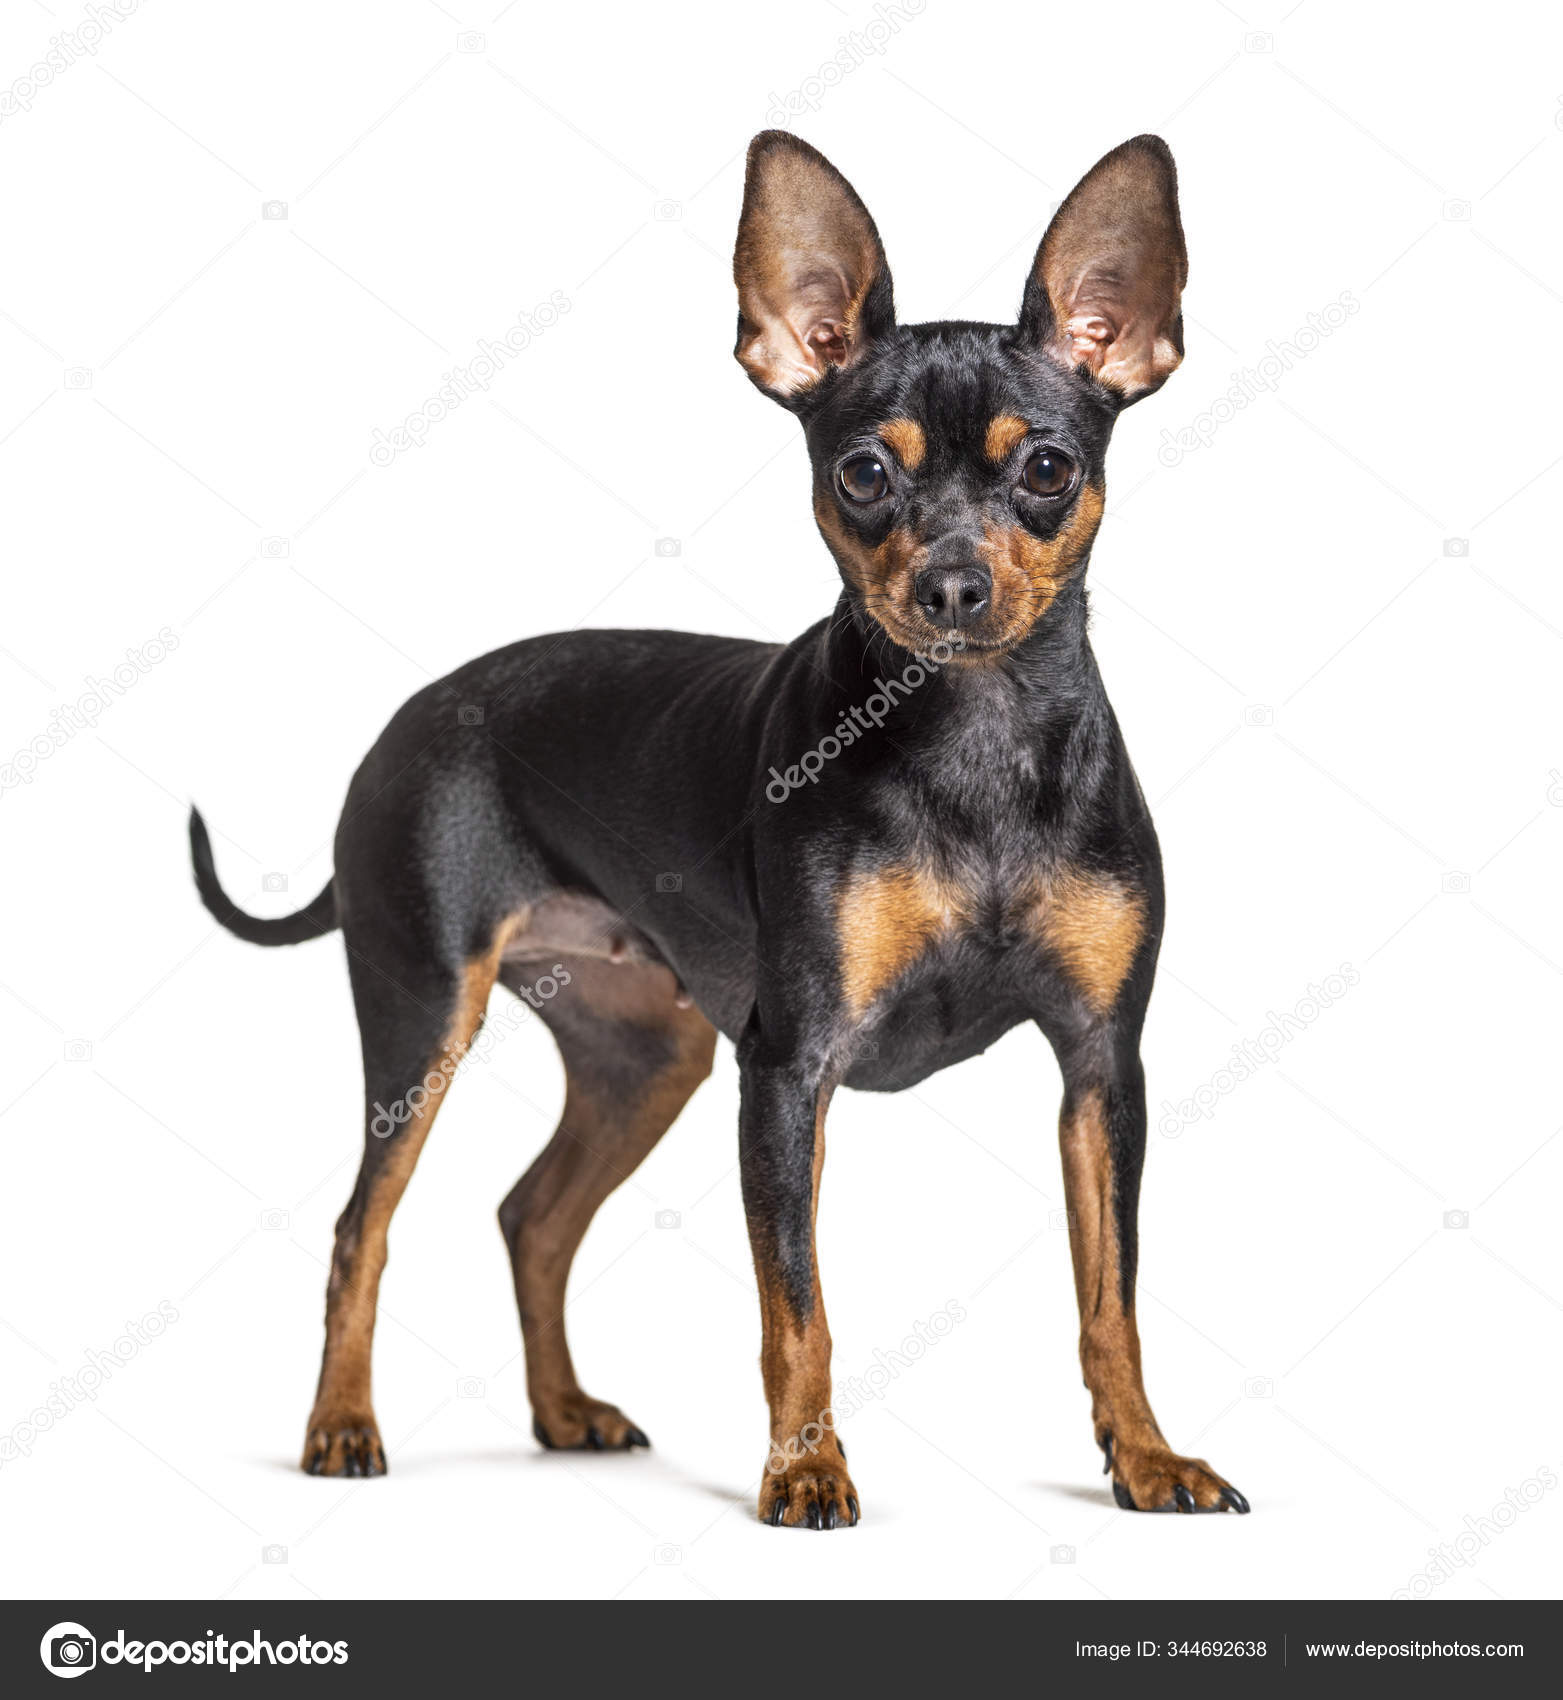 depositphotos 344692638 stock photo standing prague ratter isolated on